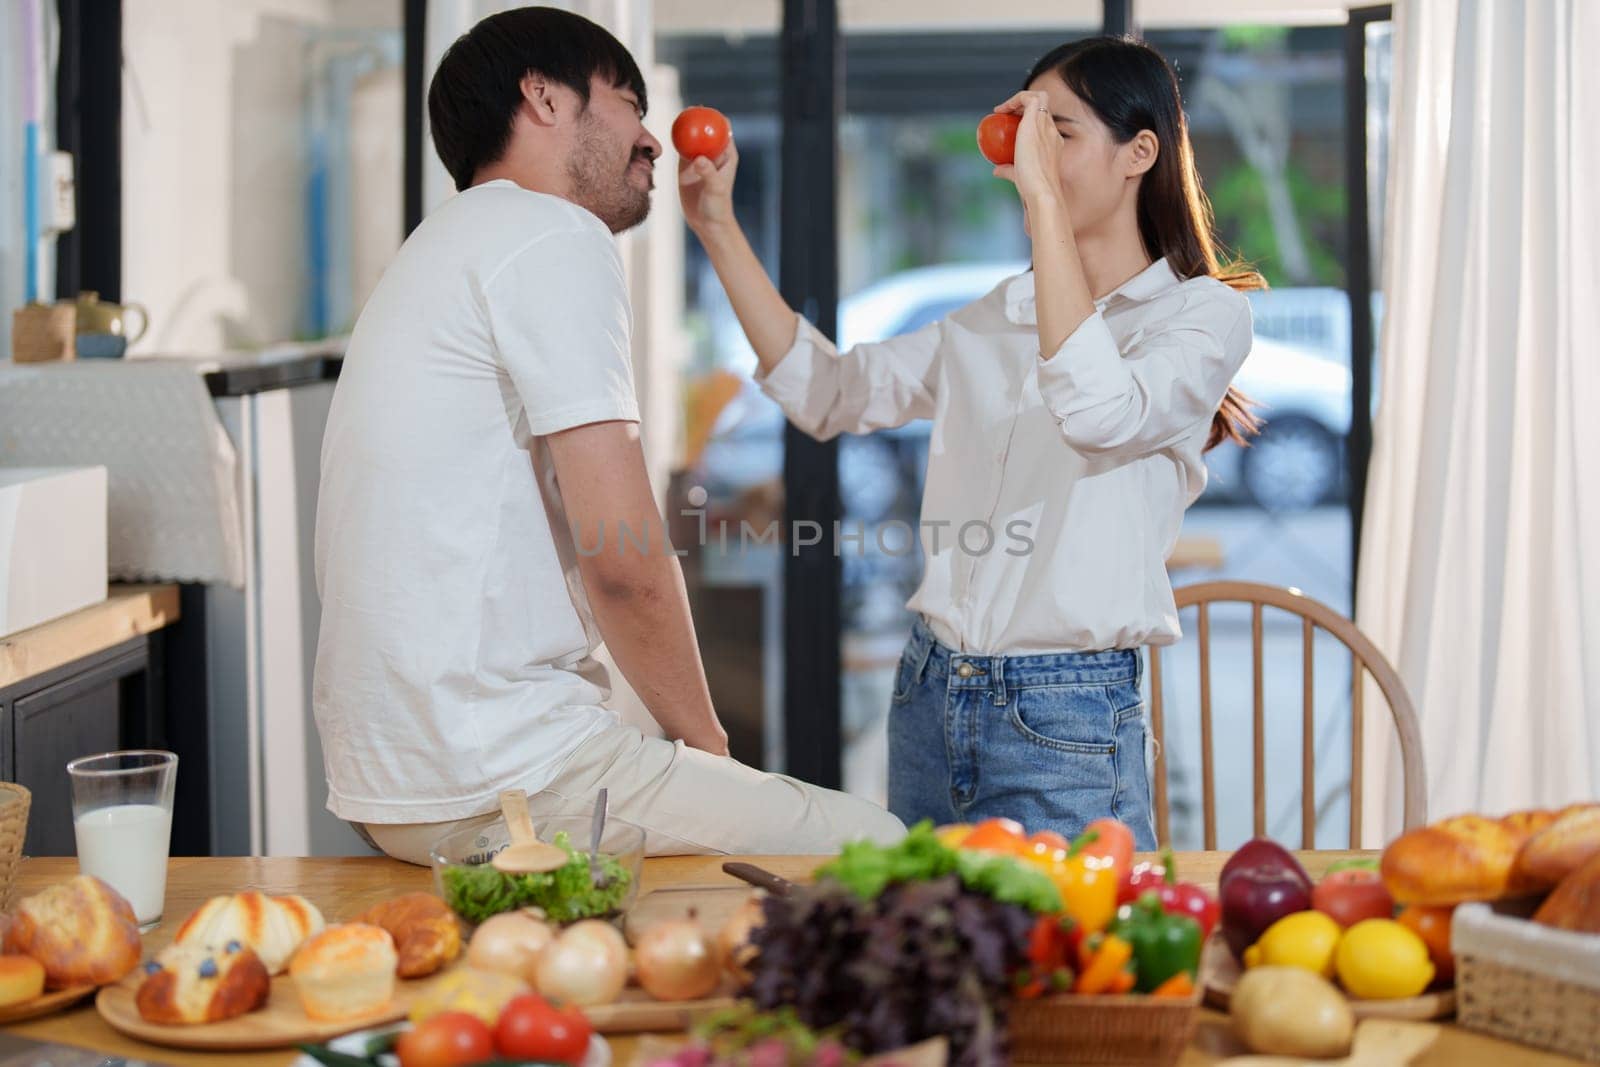 Couple cutting tomatoes for cooking or salad in home kitchen by Manastrong